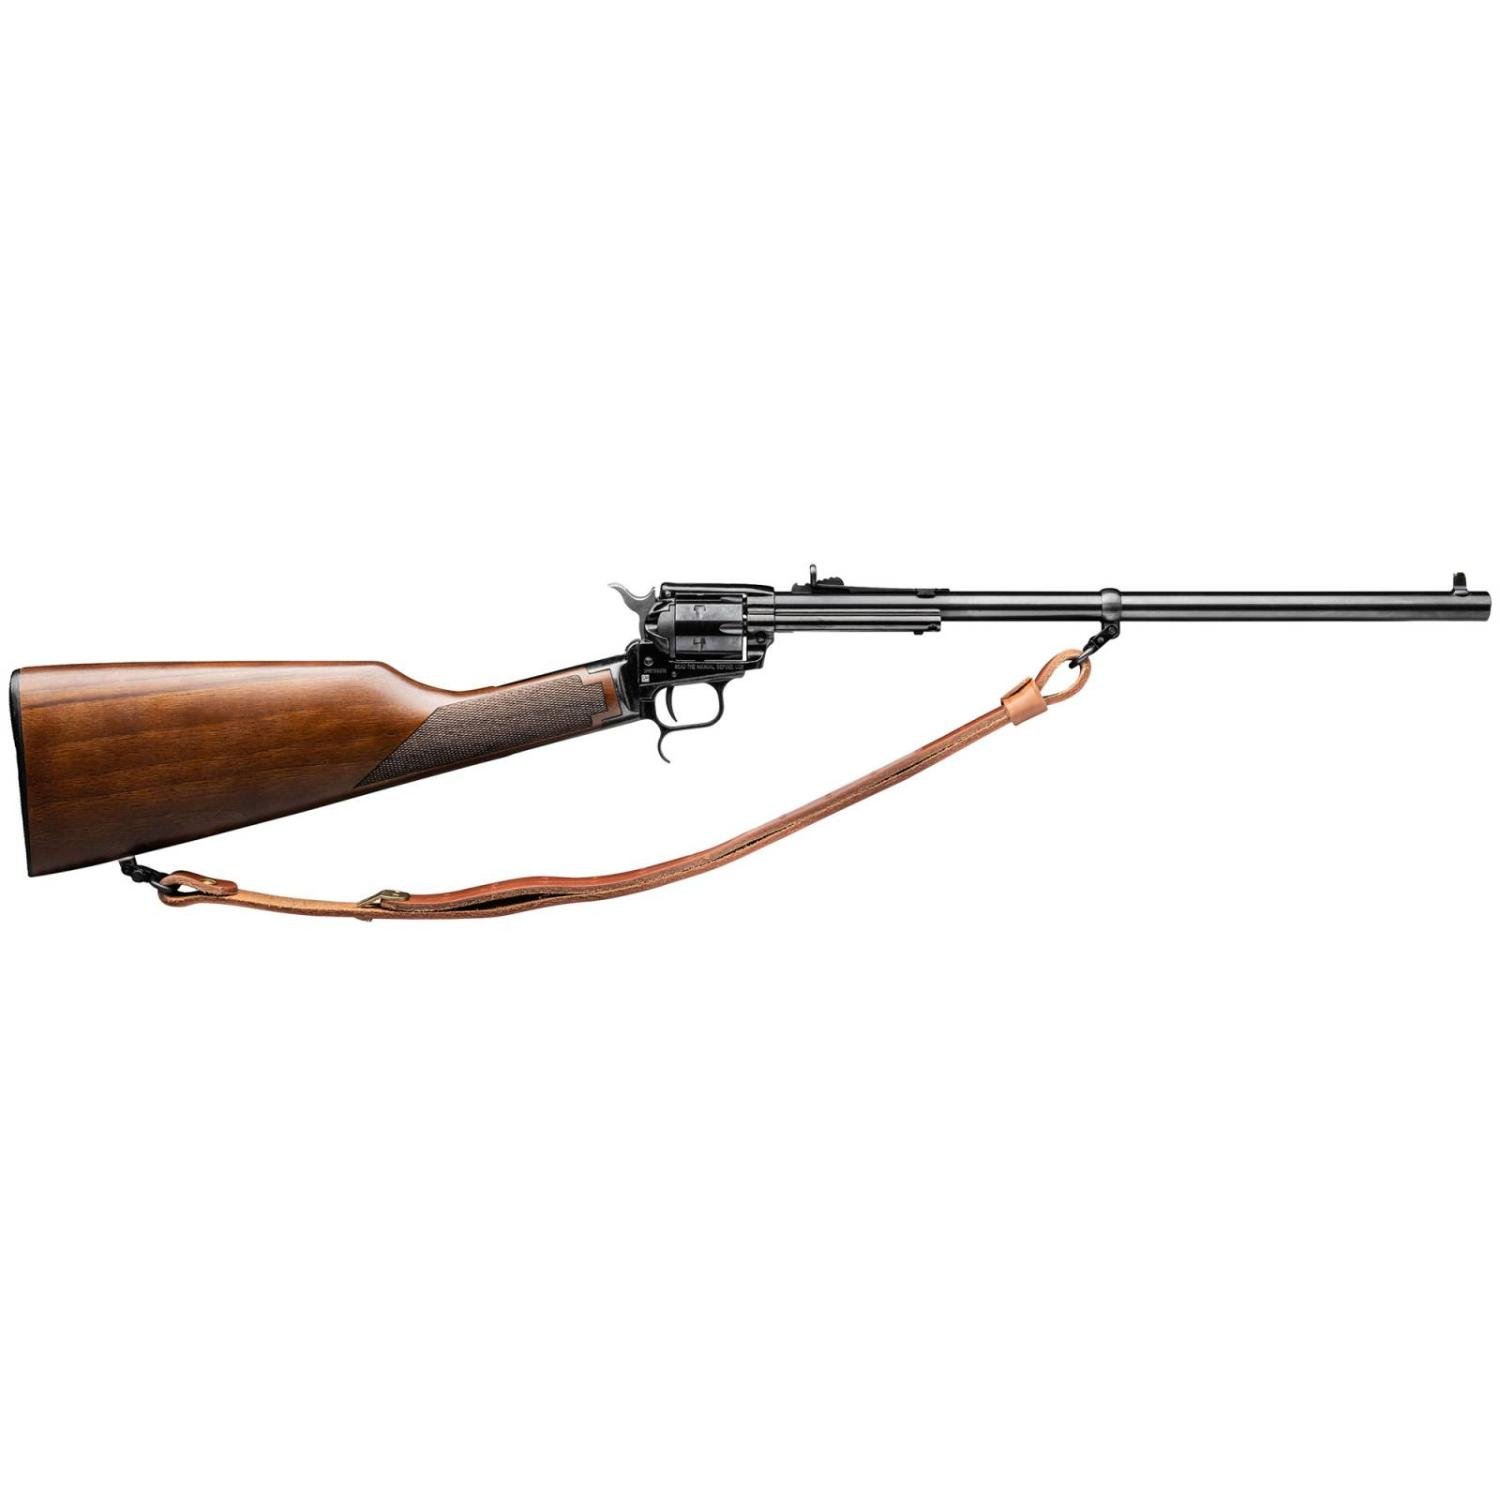 Heritage Mfg Rough Rider Rancher .22 LR 16.12" 6 Round Walnut Black Oxide Revolving Cylinder Rifle With Leather Sling - $235.64